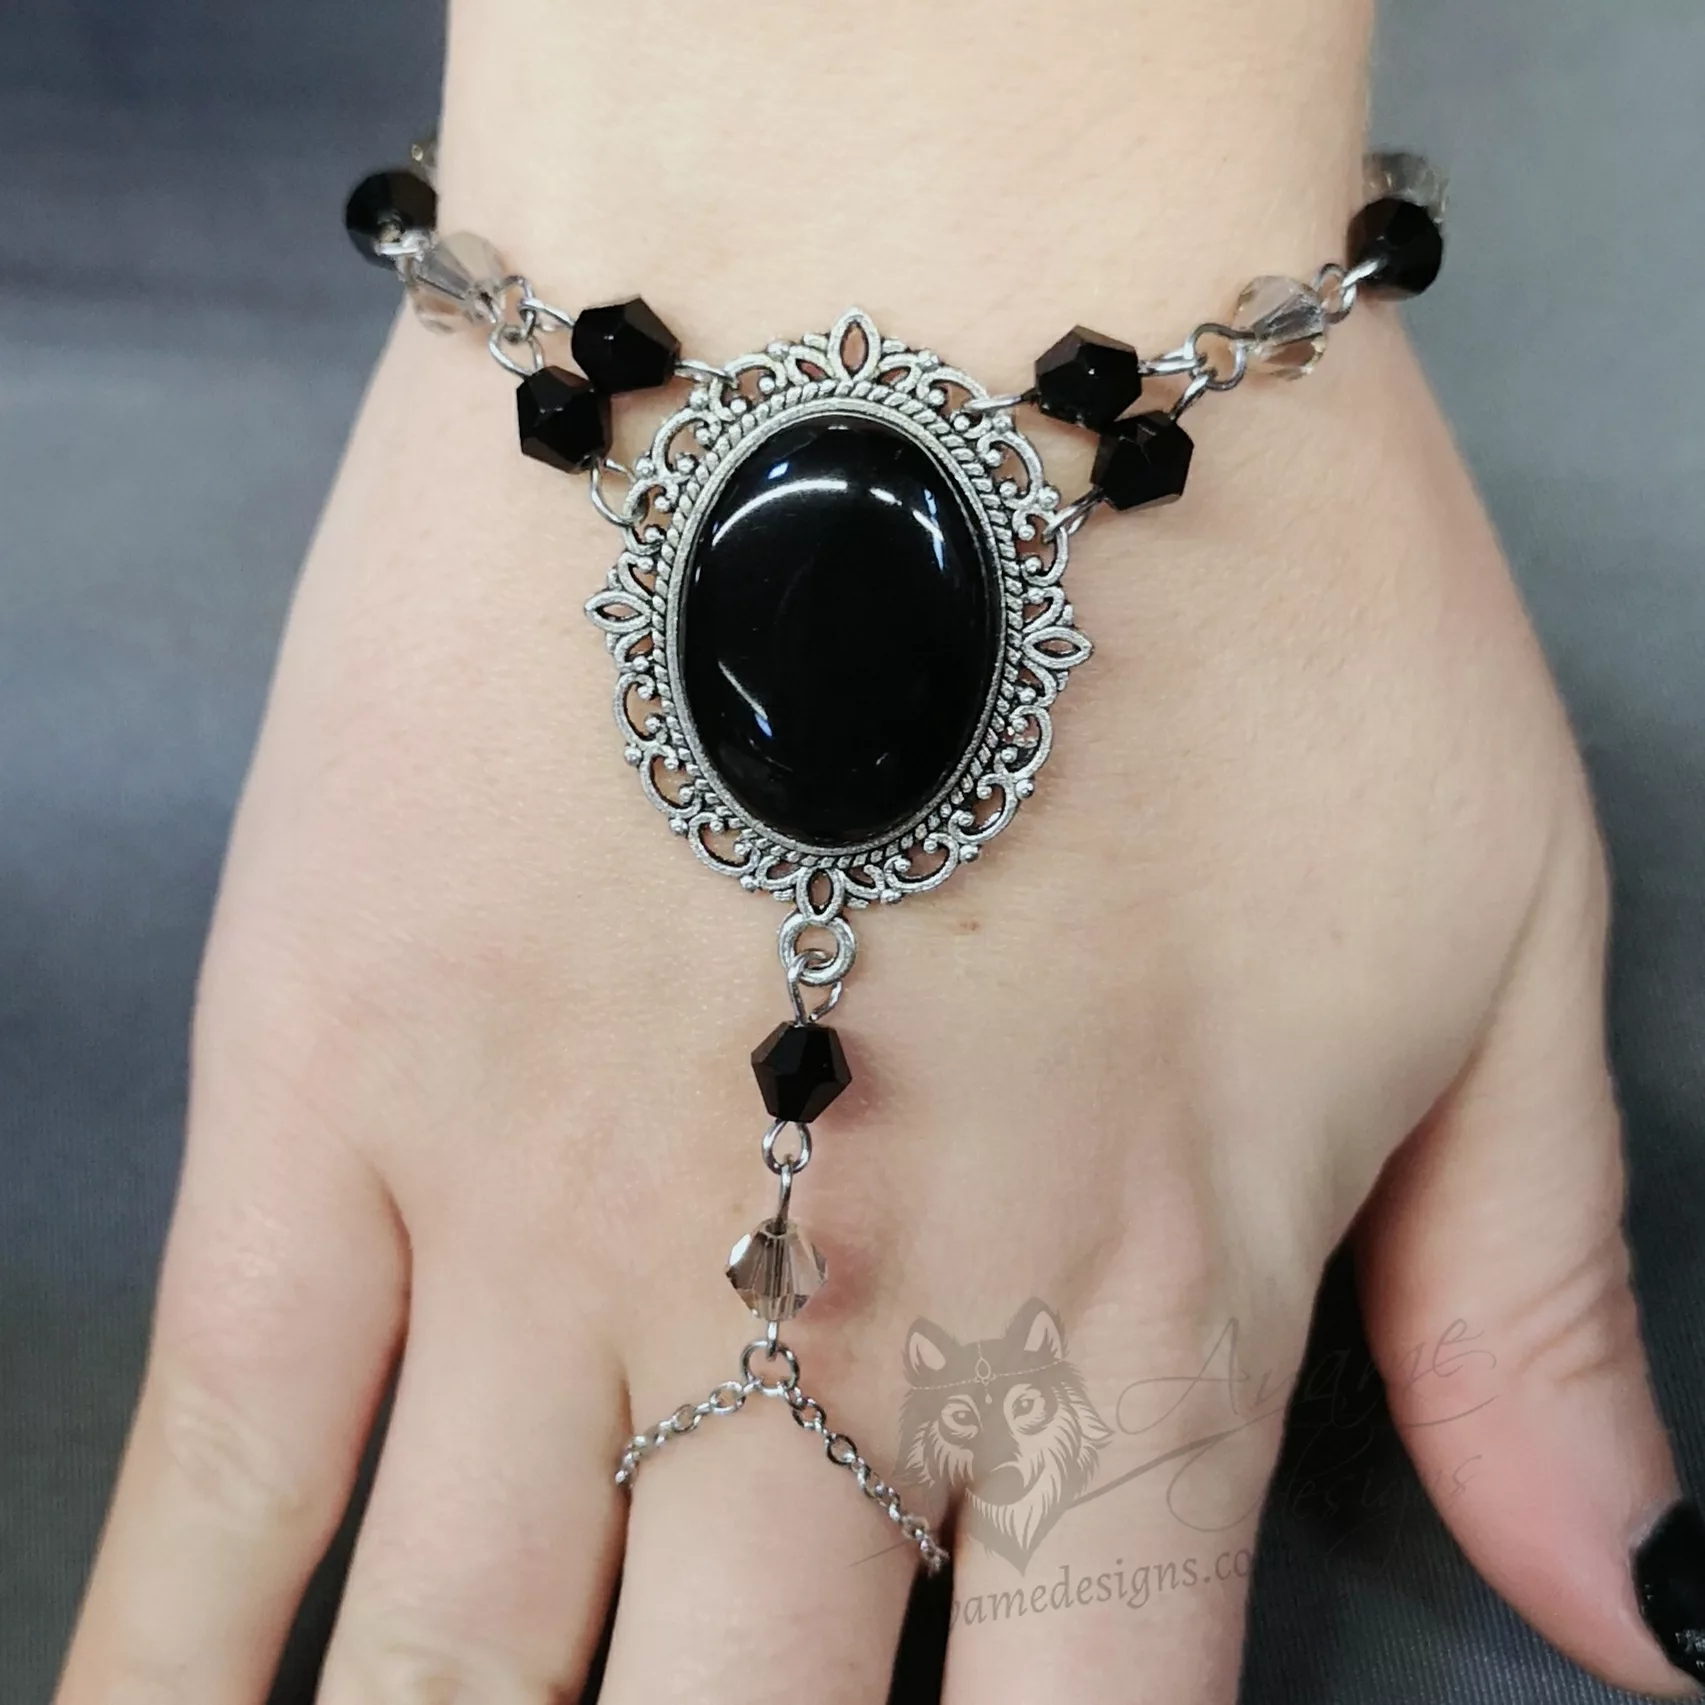 Handmade gothic bracelet with a black resin cabochon in a filigree frame, and black and grey Austrian crystal beads